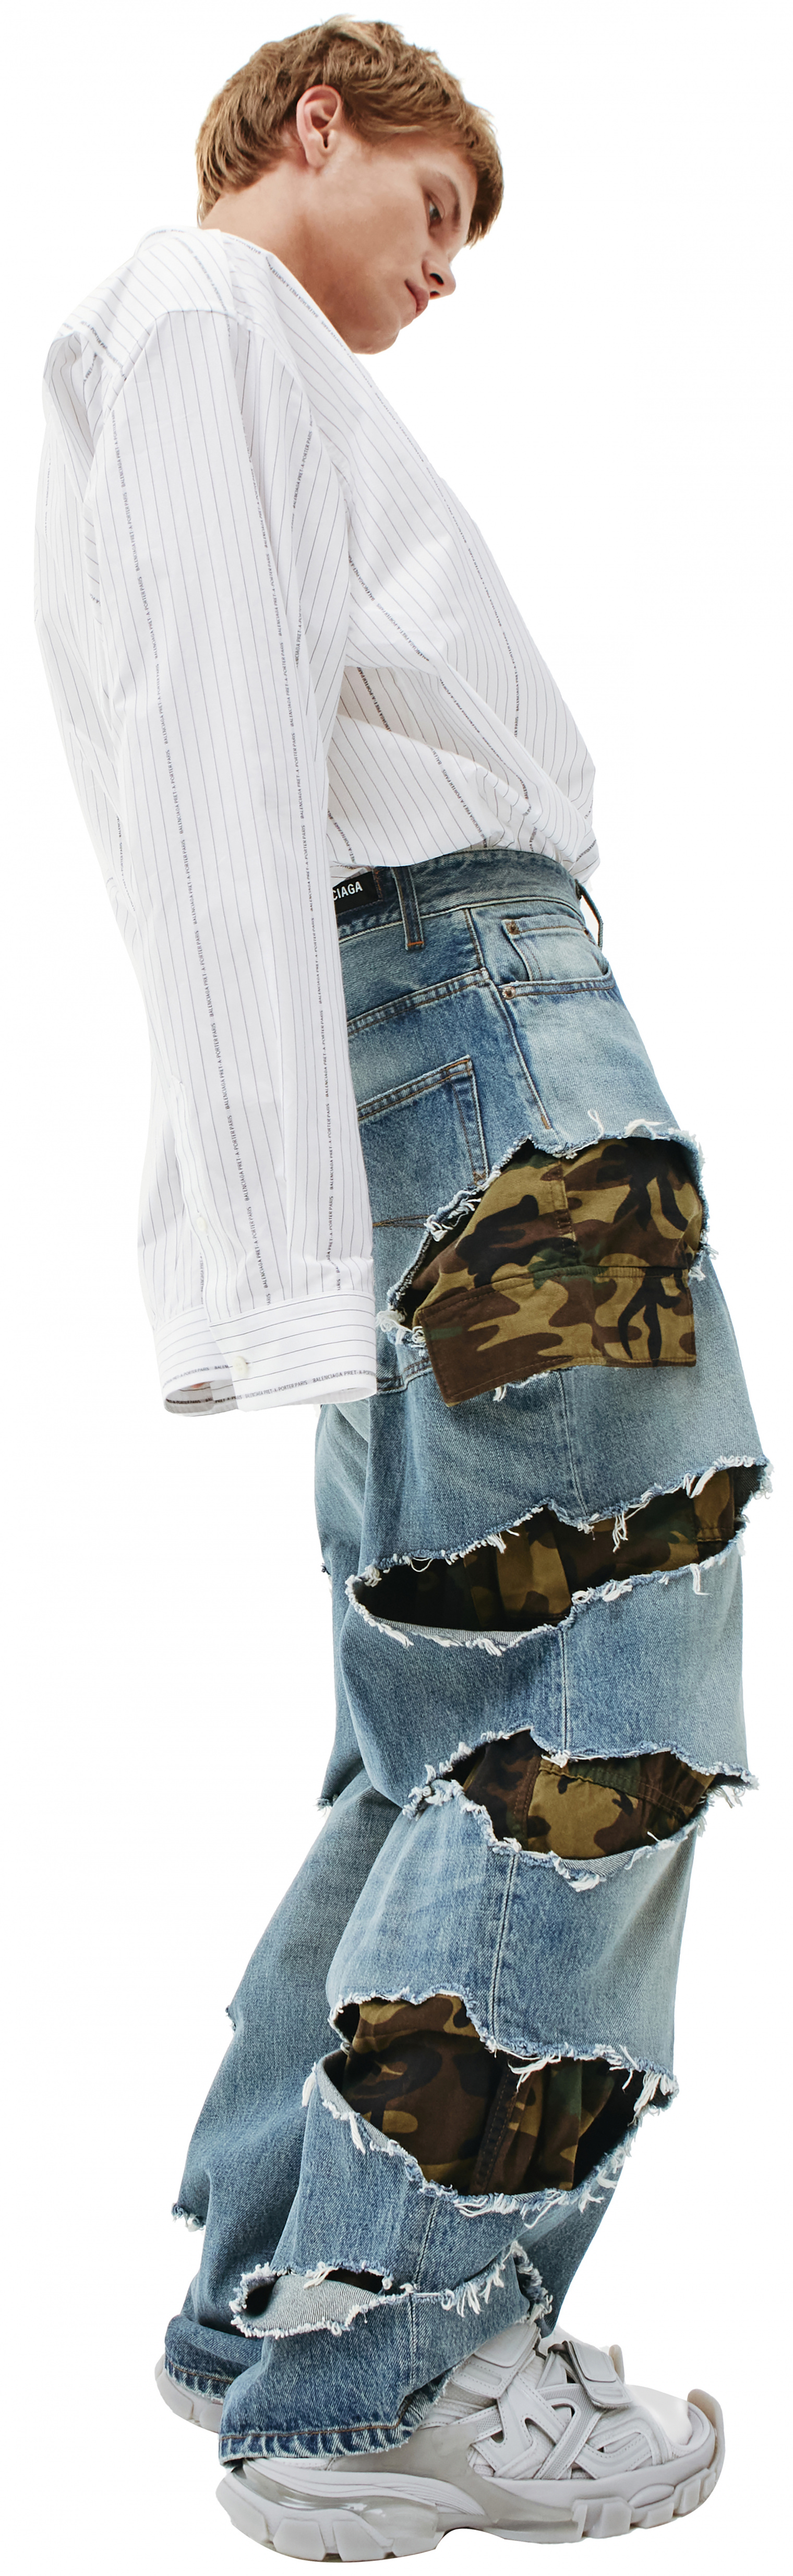 Balenciaga Ripped jeans with camouflage lining